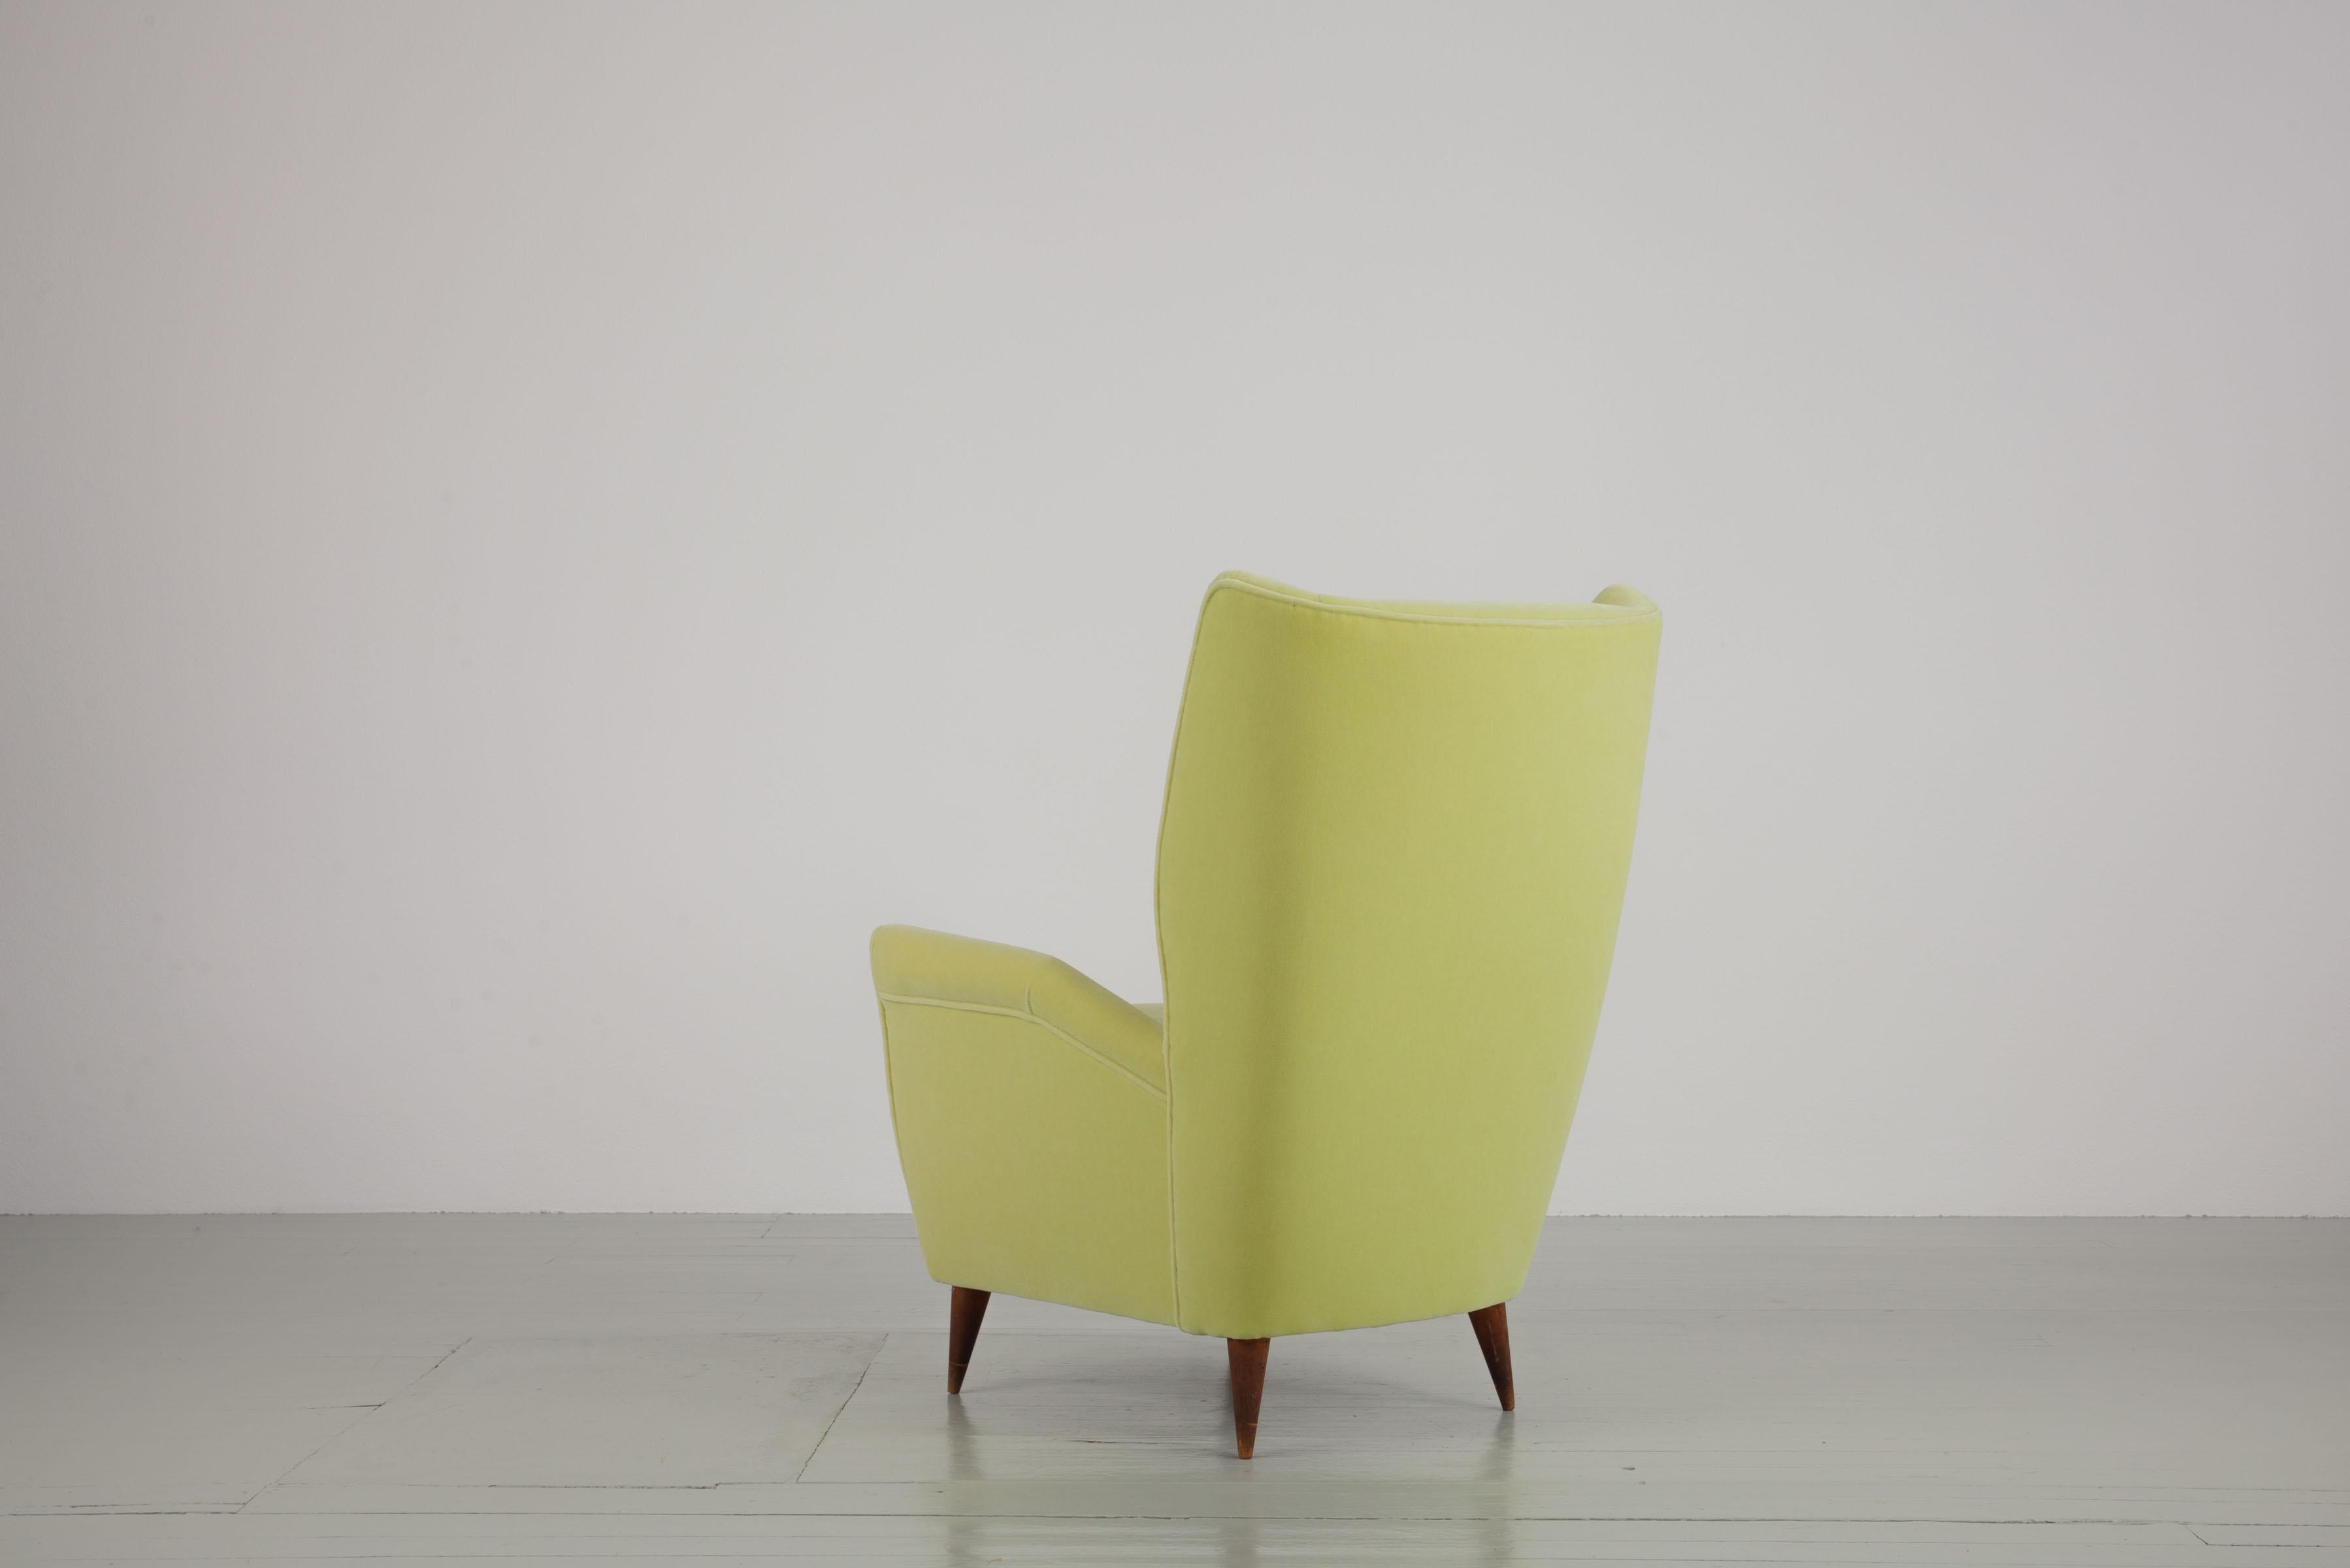 Italian Yellow Wingback Chair, Produced by I.S.A. Bergamo, 1950s For Sale 1